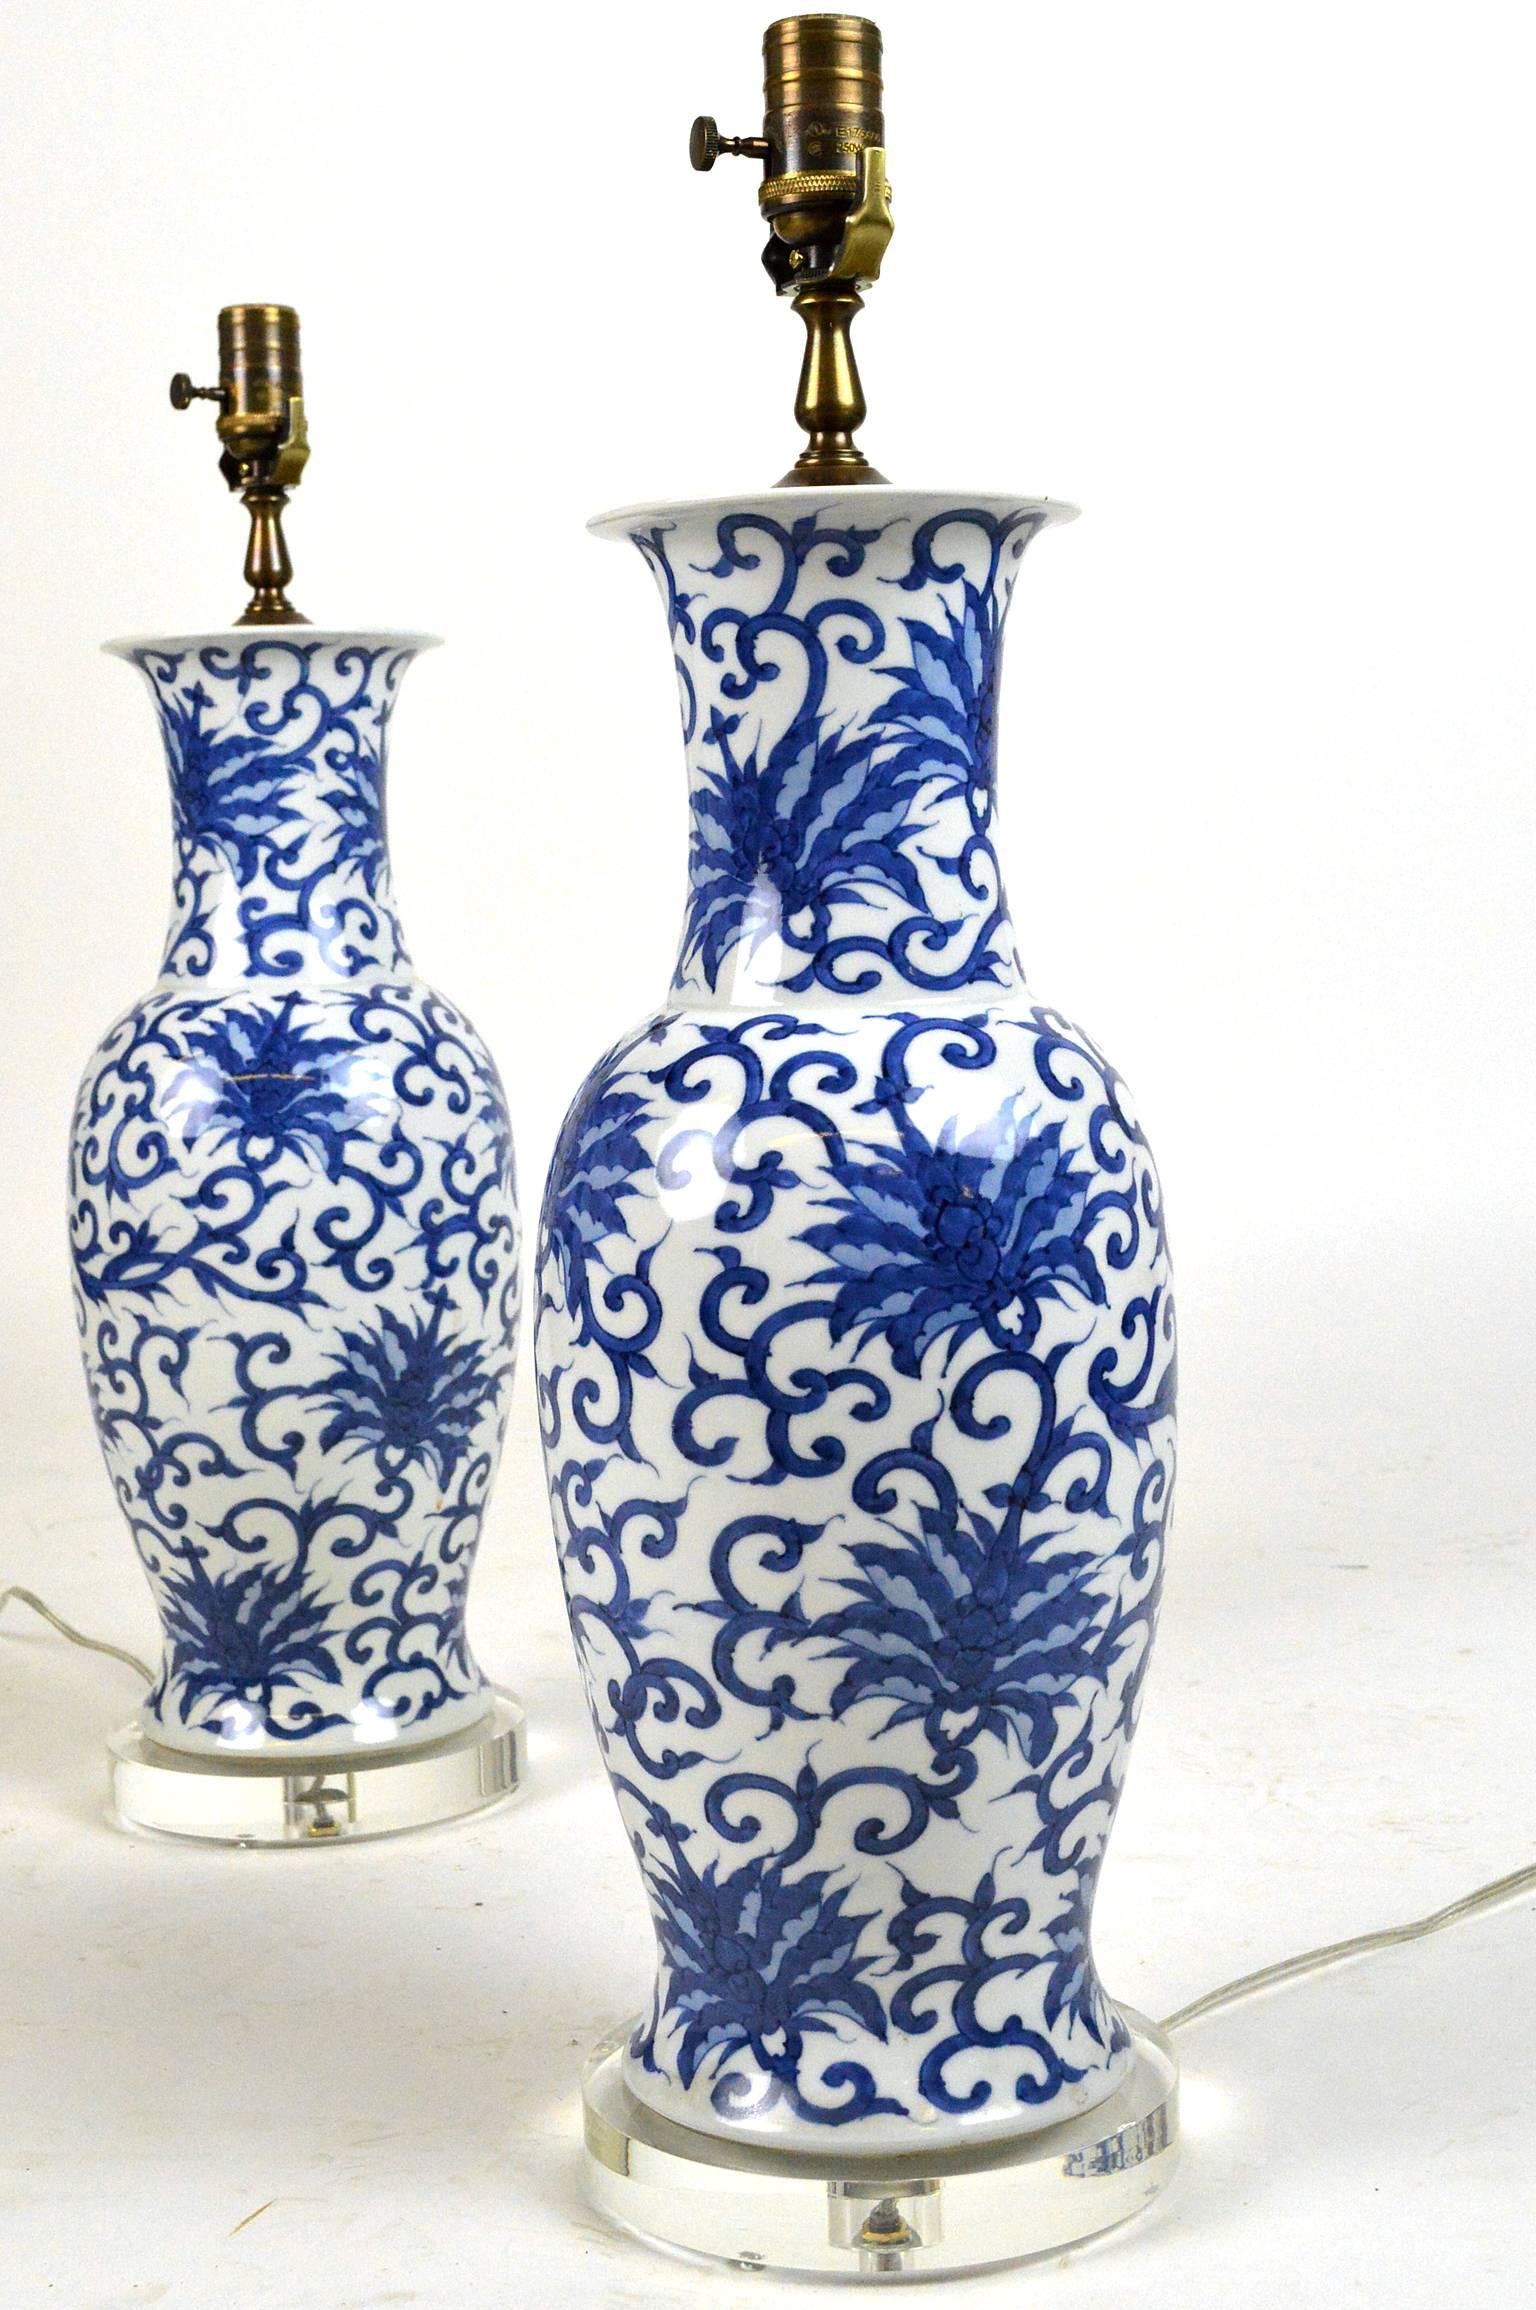 Pair of Mid-Century Japanese blue and white porcelain lamps.
Measures: 25